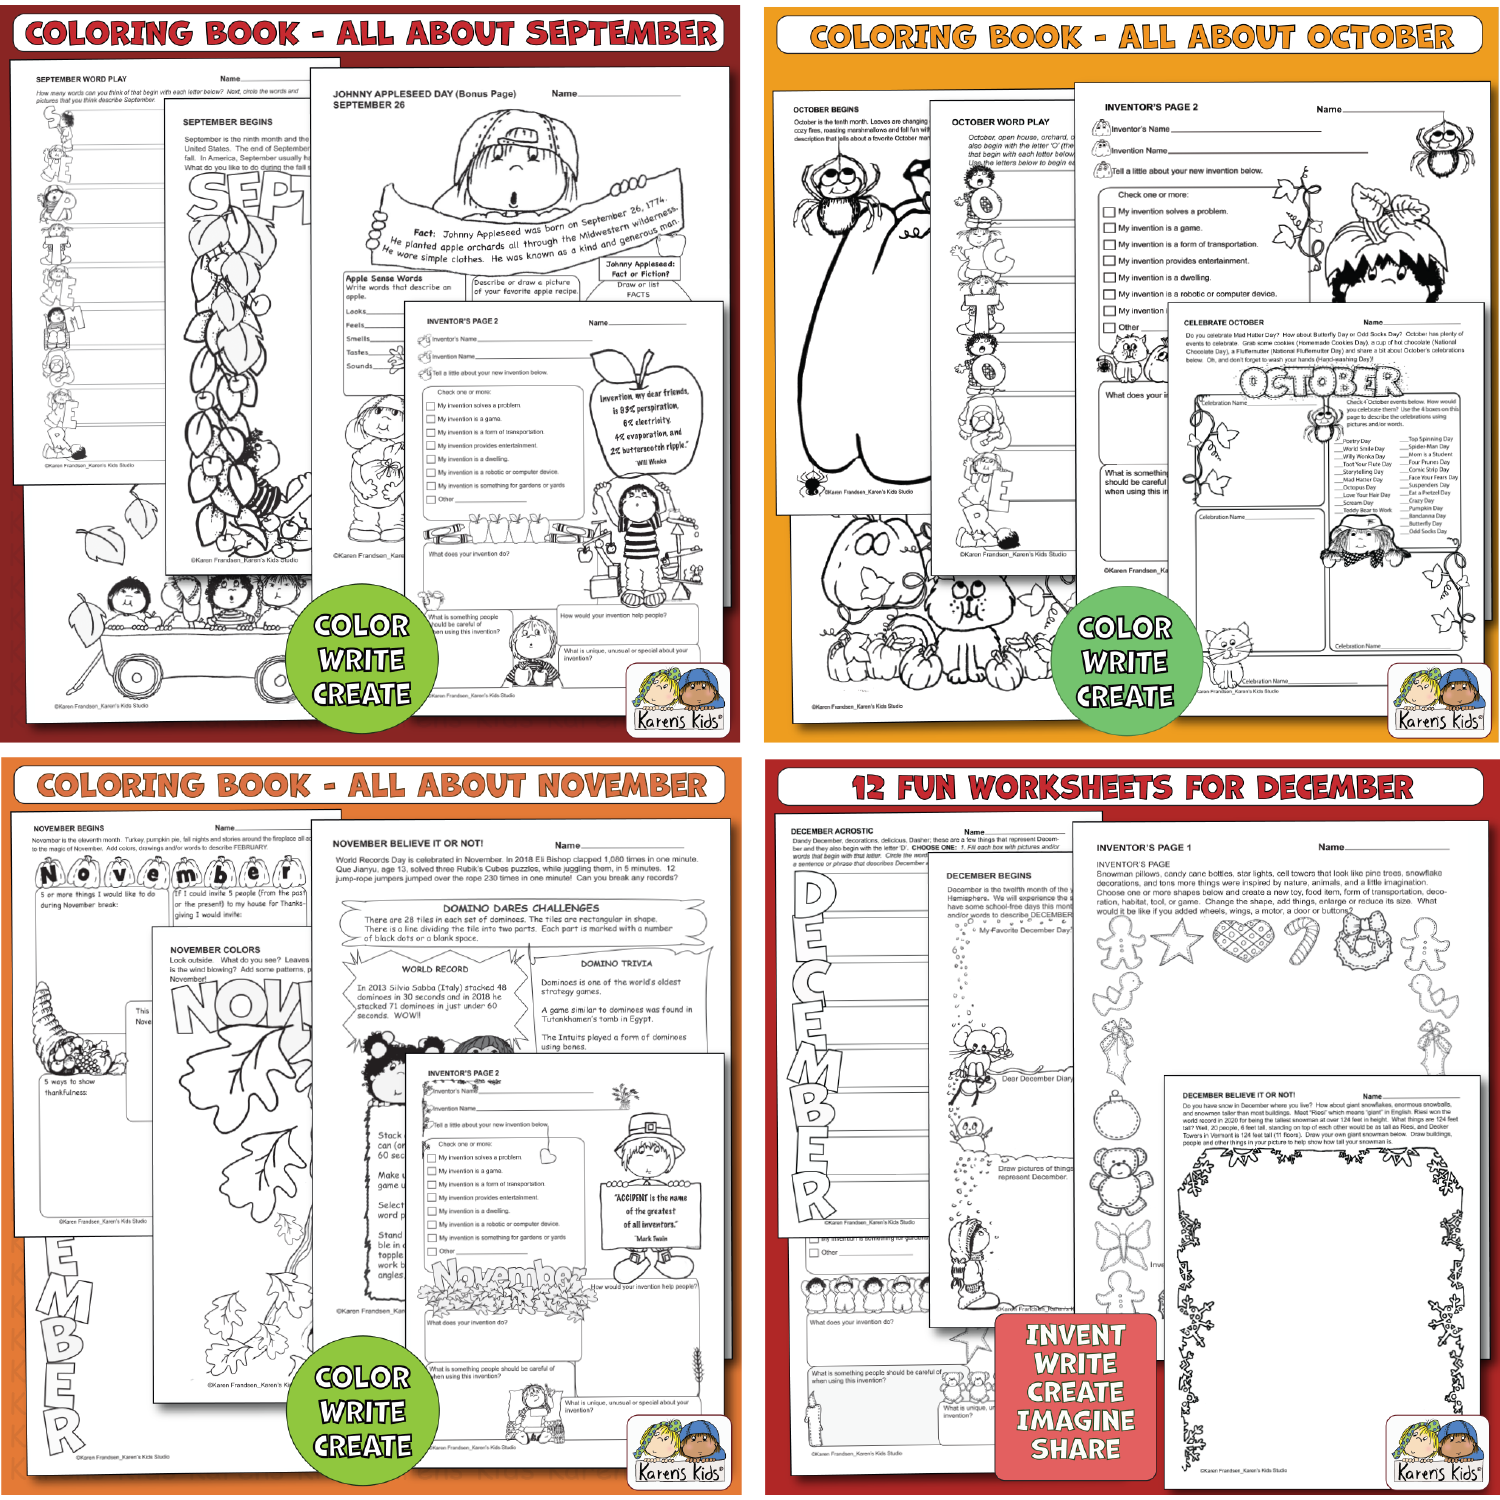 5 back and white sample pages  showing worksheets for September. 5 back and white sample pages  showing worksheets for October. 5 back and white sample pages  showing worksheets for November. 5 back and white sample pages  showing worksheets for December.